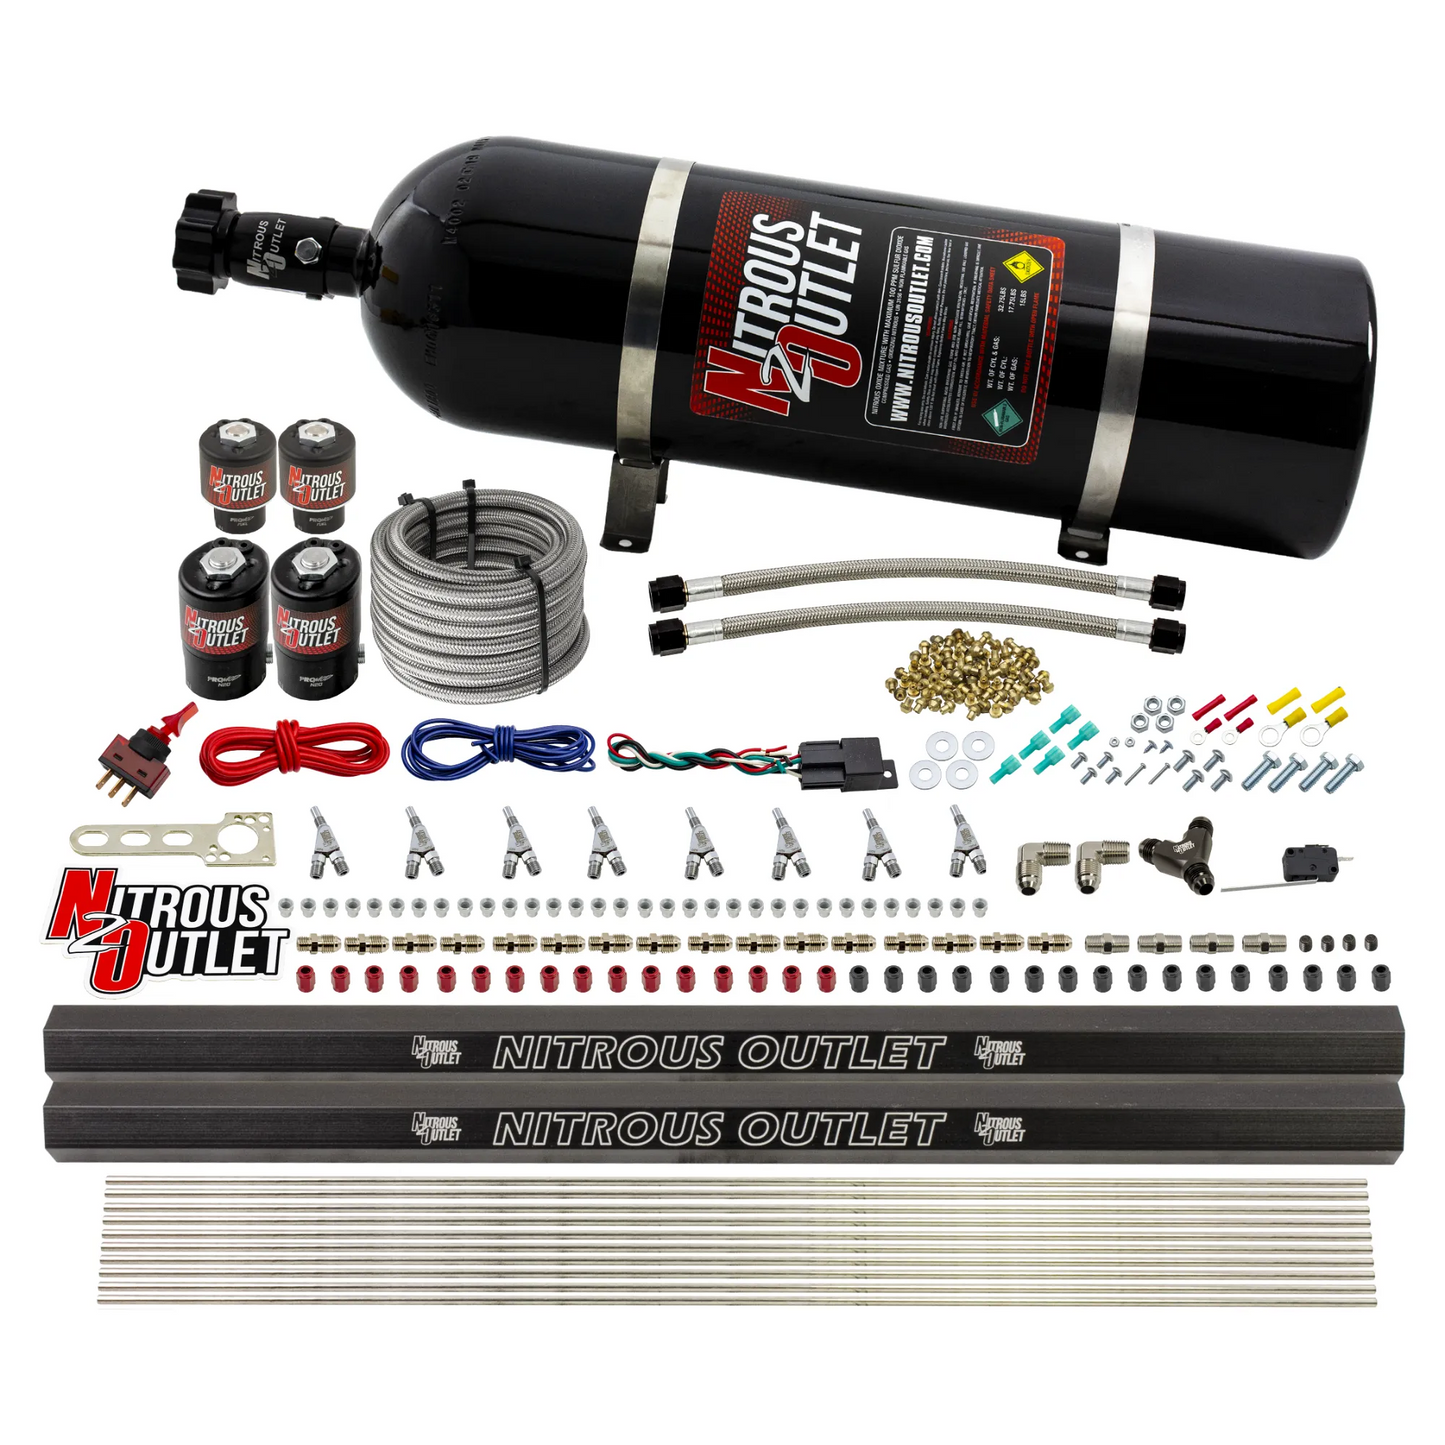 8 Cylinder Single Stage Direct Port Nitrous System with Injection Rails - Gas - .122 Nitrous/.177 Fuel - 45-55 PSI - Straight Blow Through Nozzles